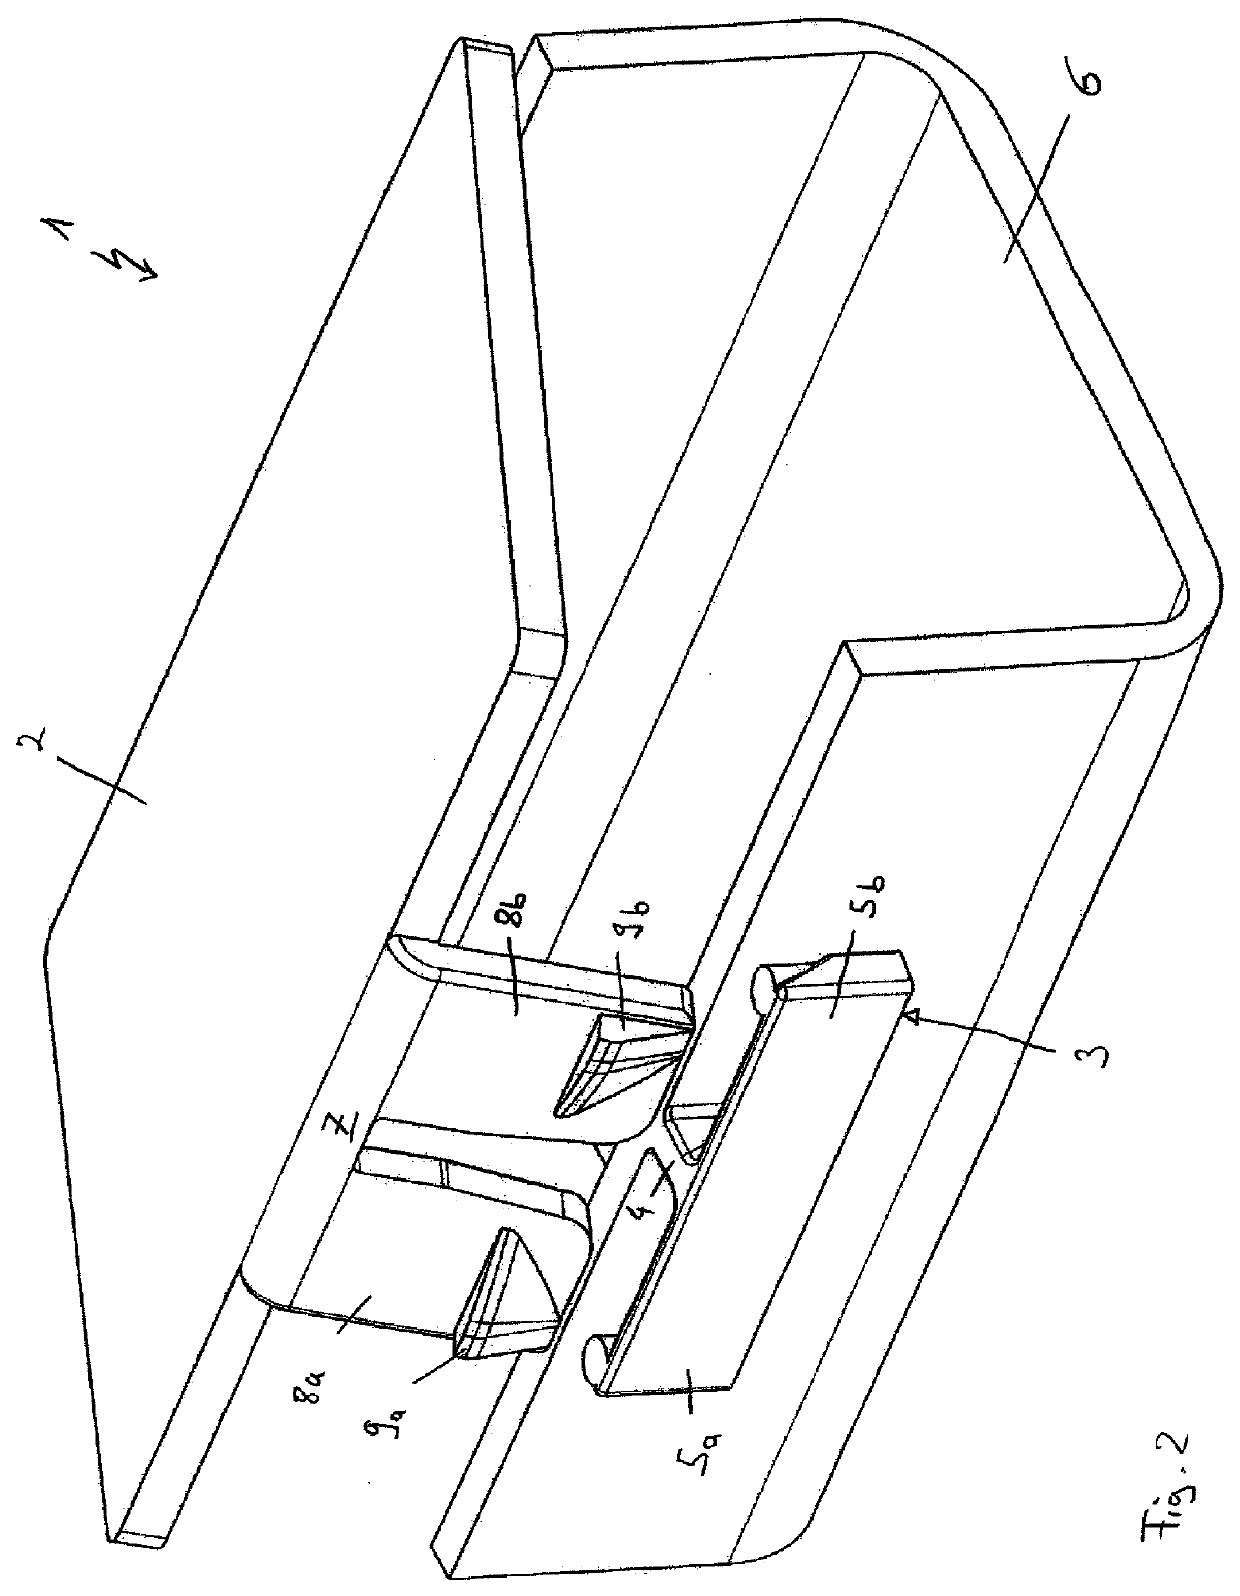 Device for accommodating a cable assembly